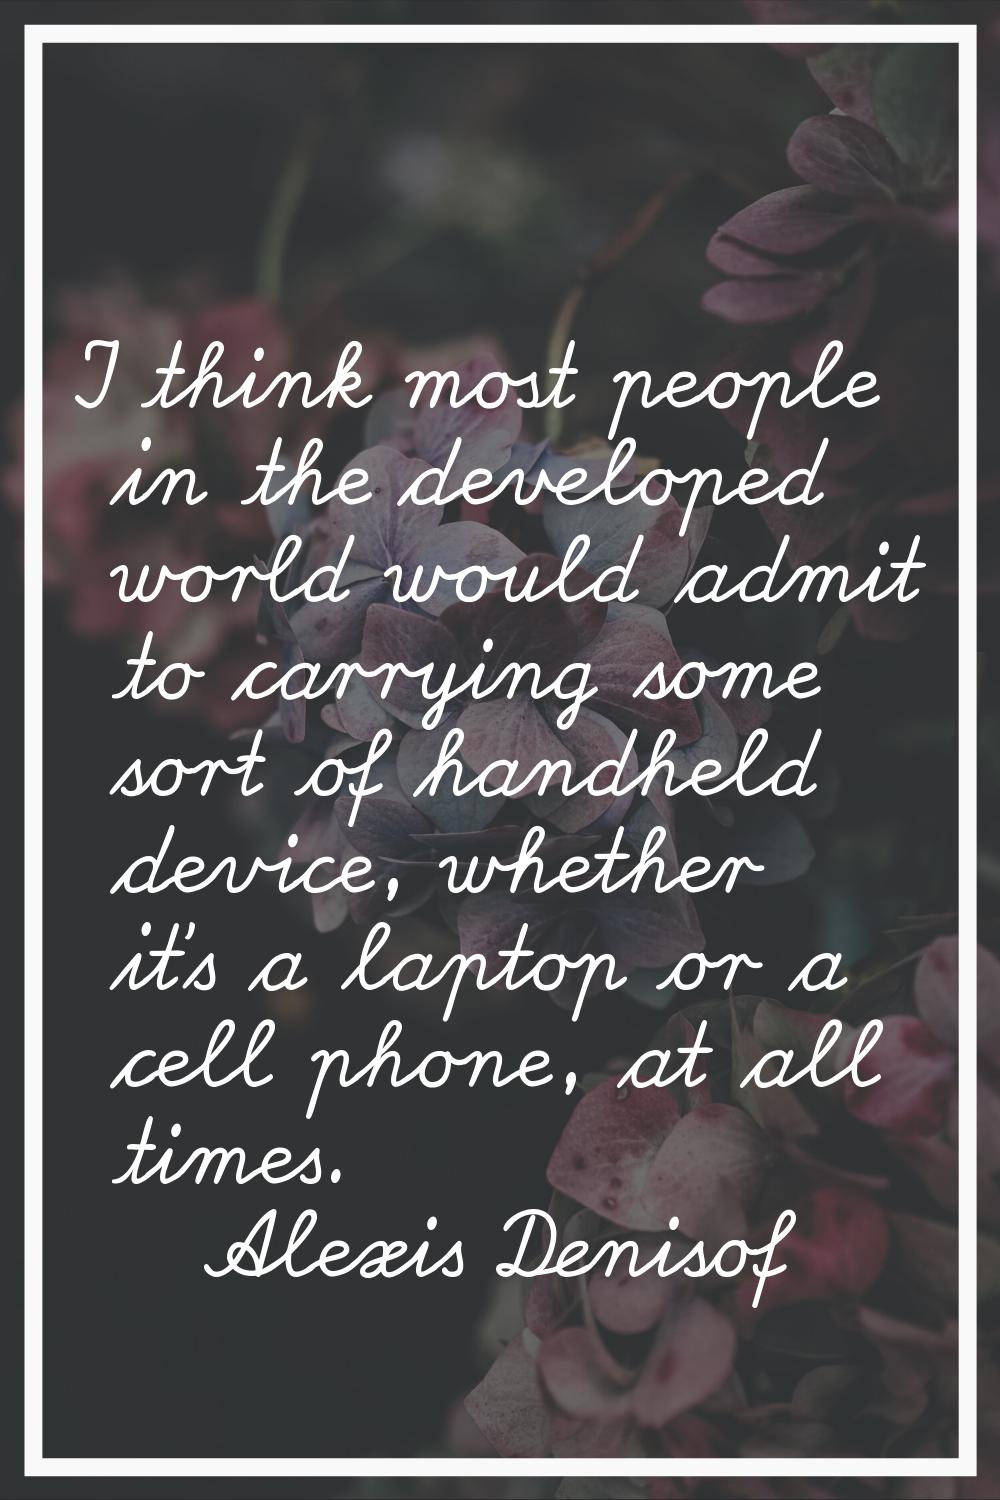 I think most people in the developed world would admit to carrying some sort of handheld device, wh